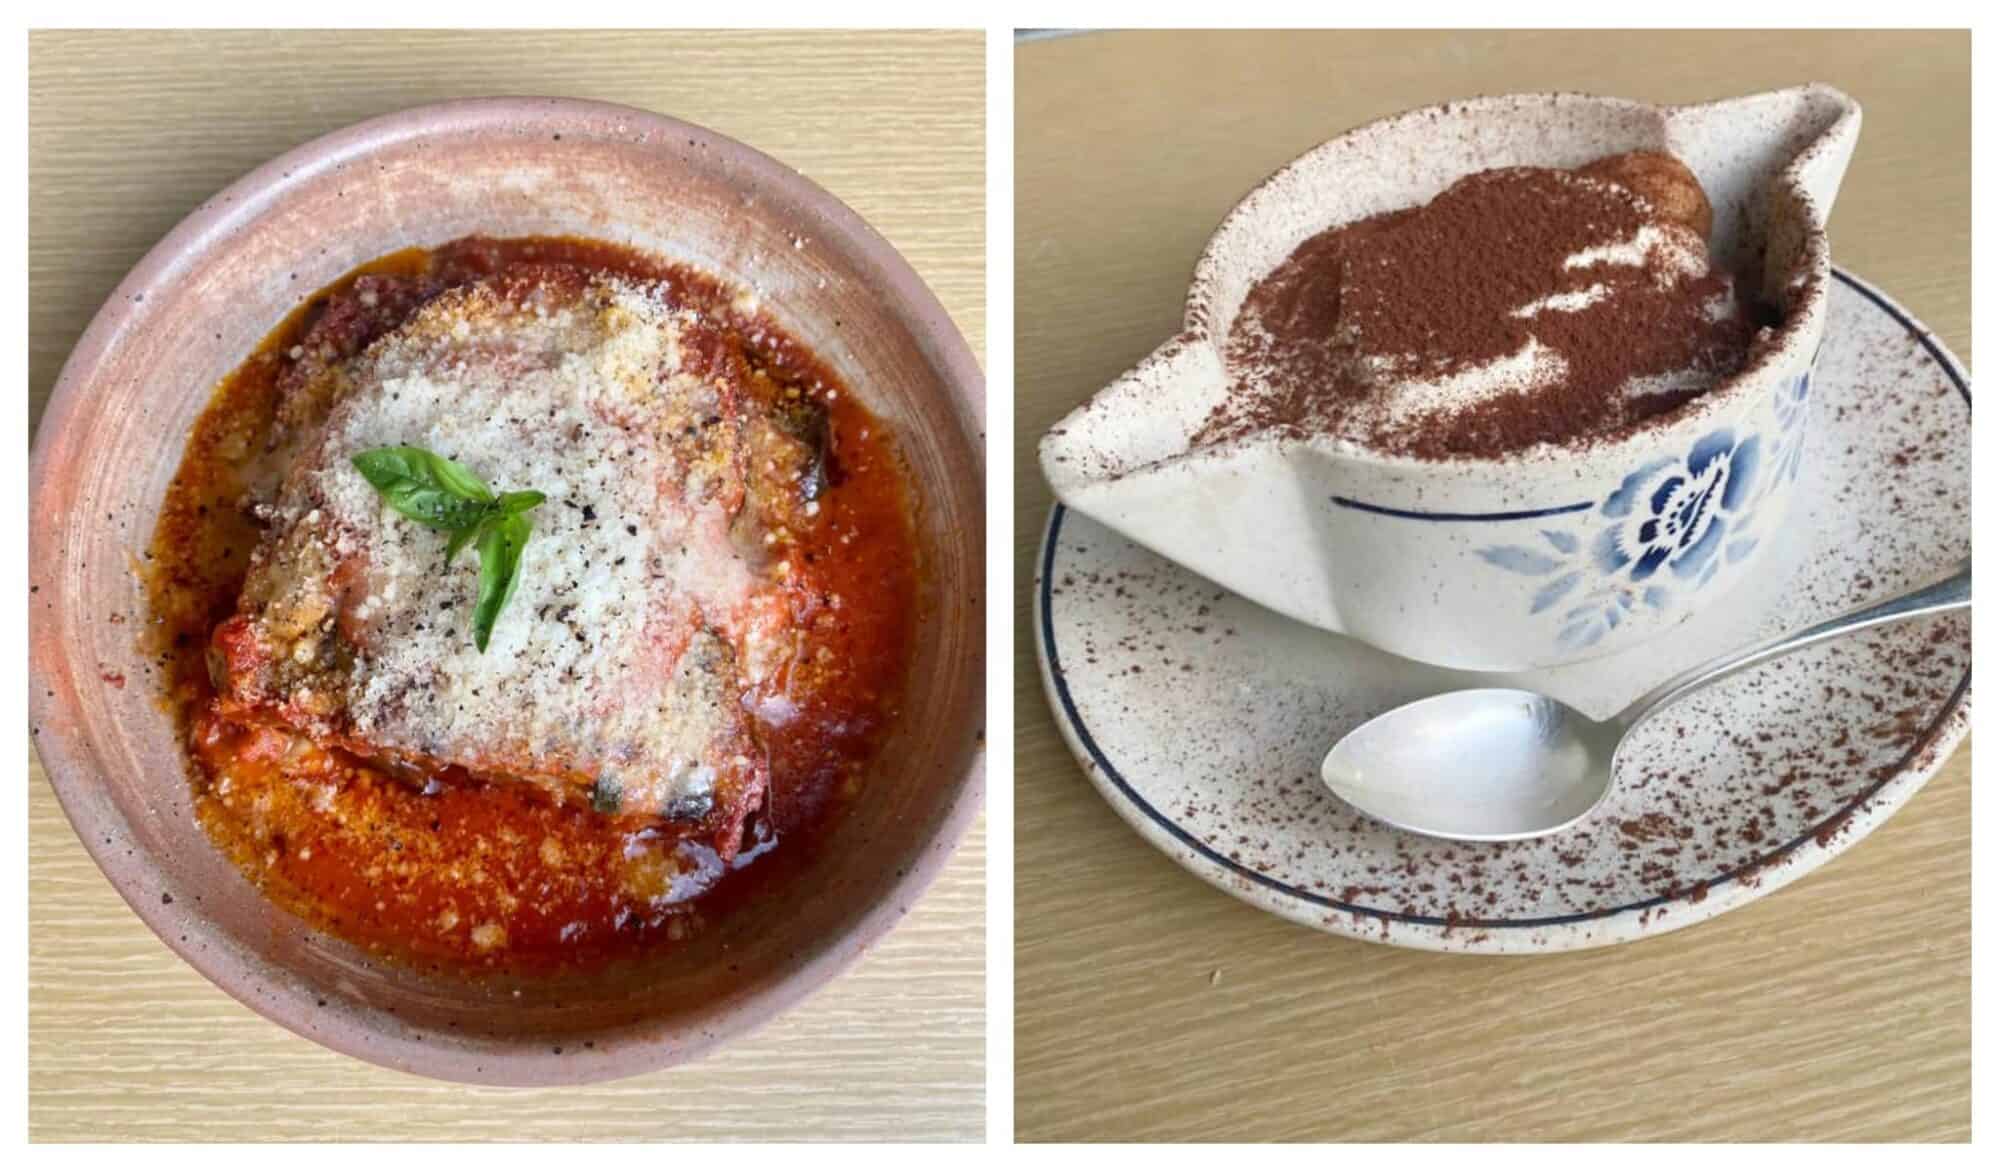 Food presented at Come a Casa Italian restaurant. On the left, lasagna and on the right, tiramisu